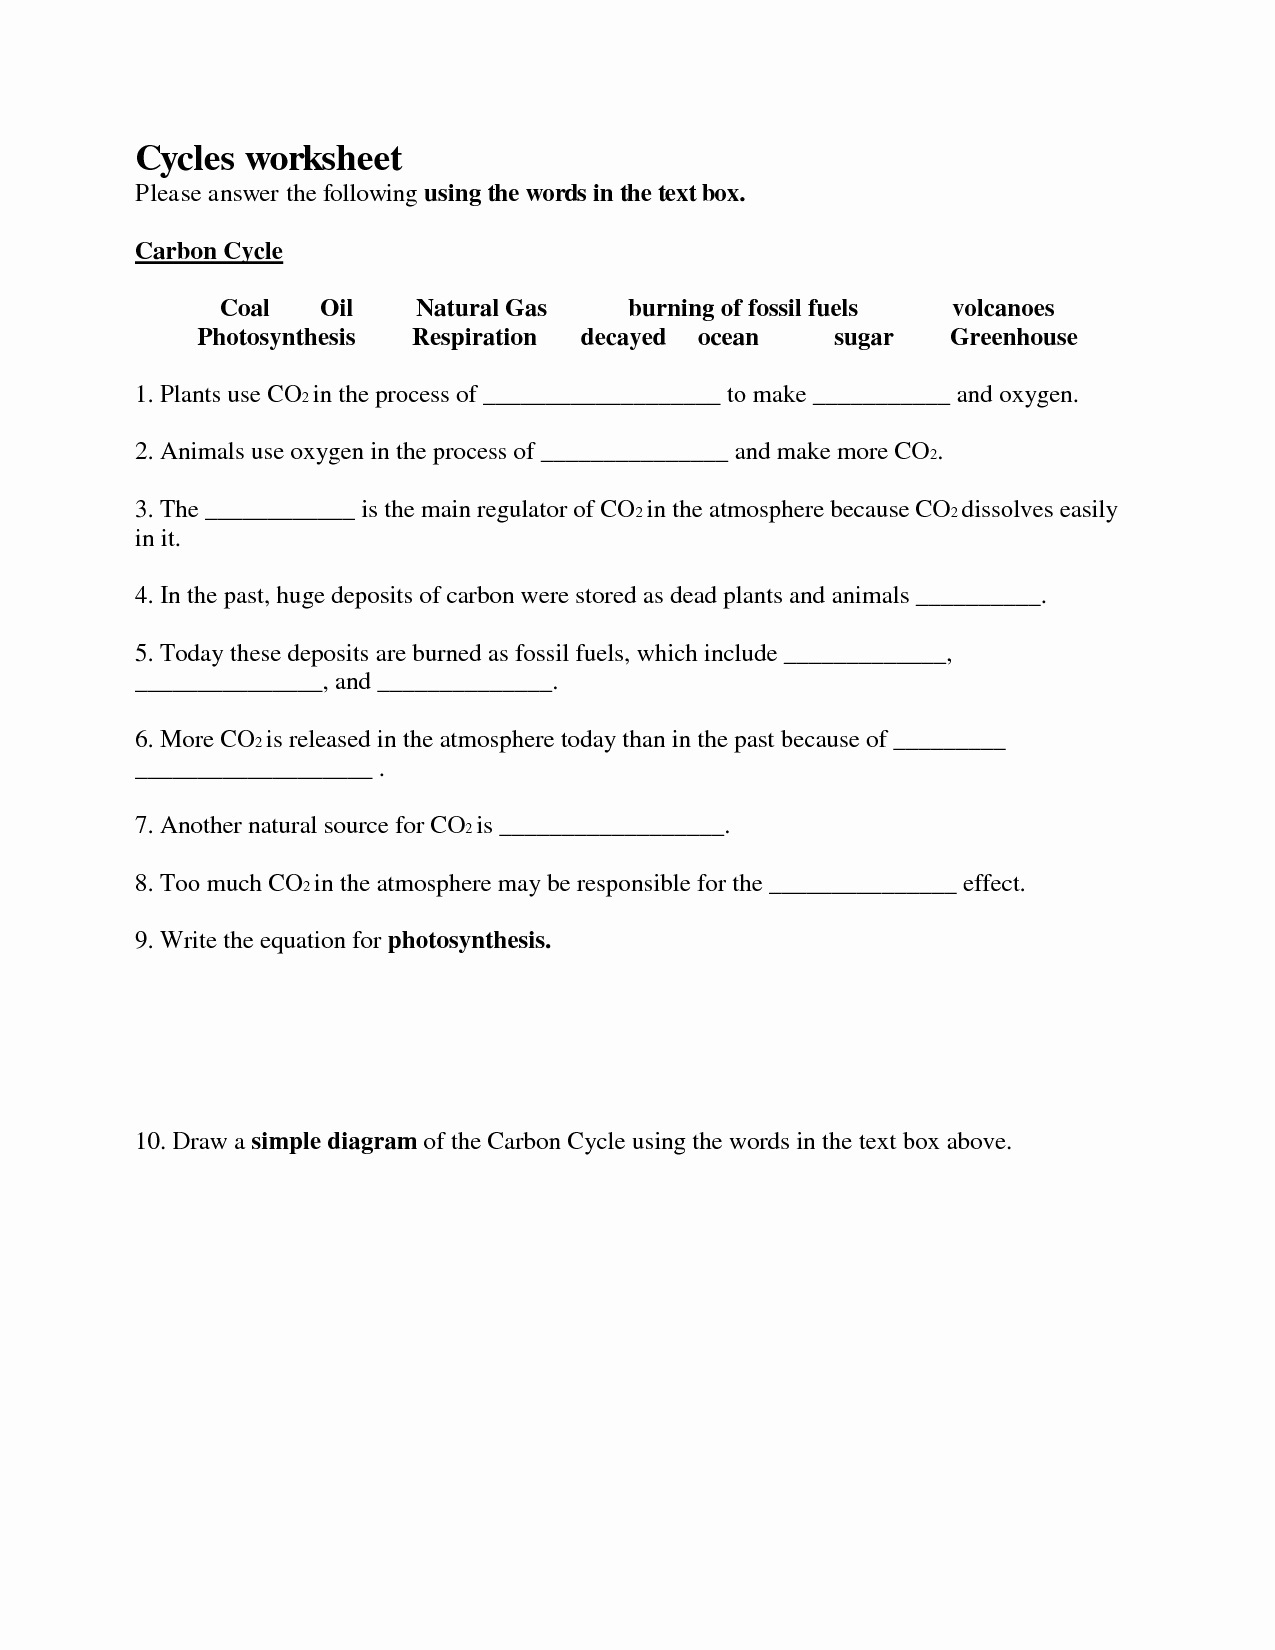 Carbon Cycle Worksheet Answers Fresh Worksheets Cycles Worksheet Answers Cheatslist Free